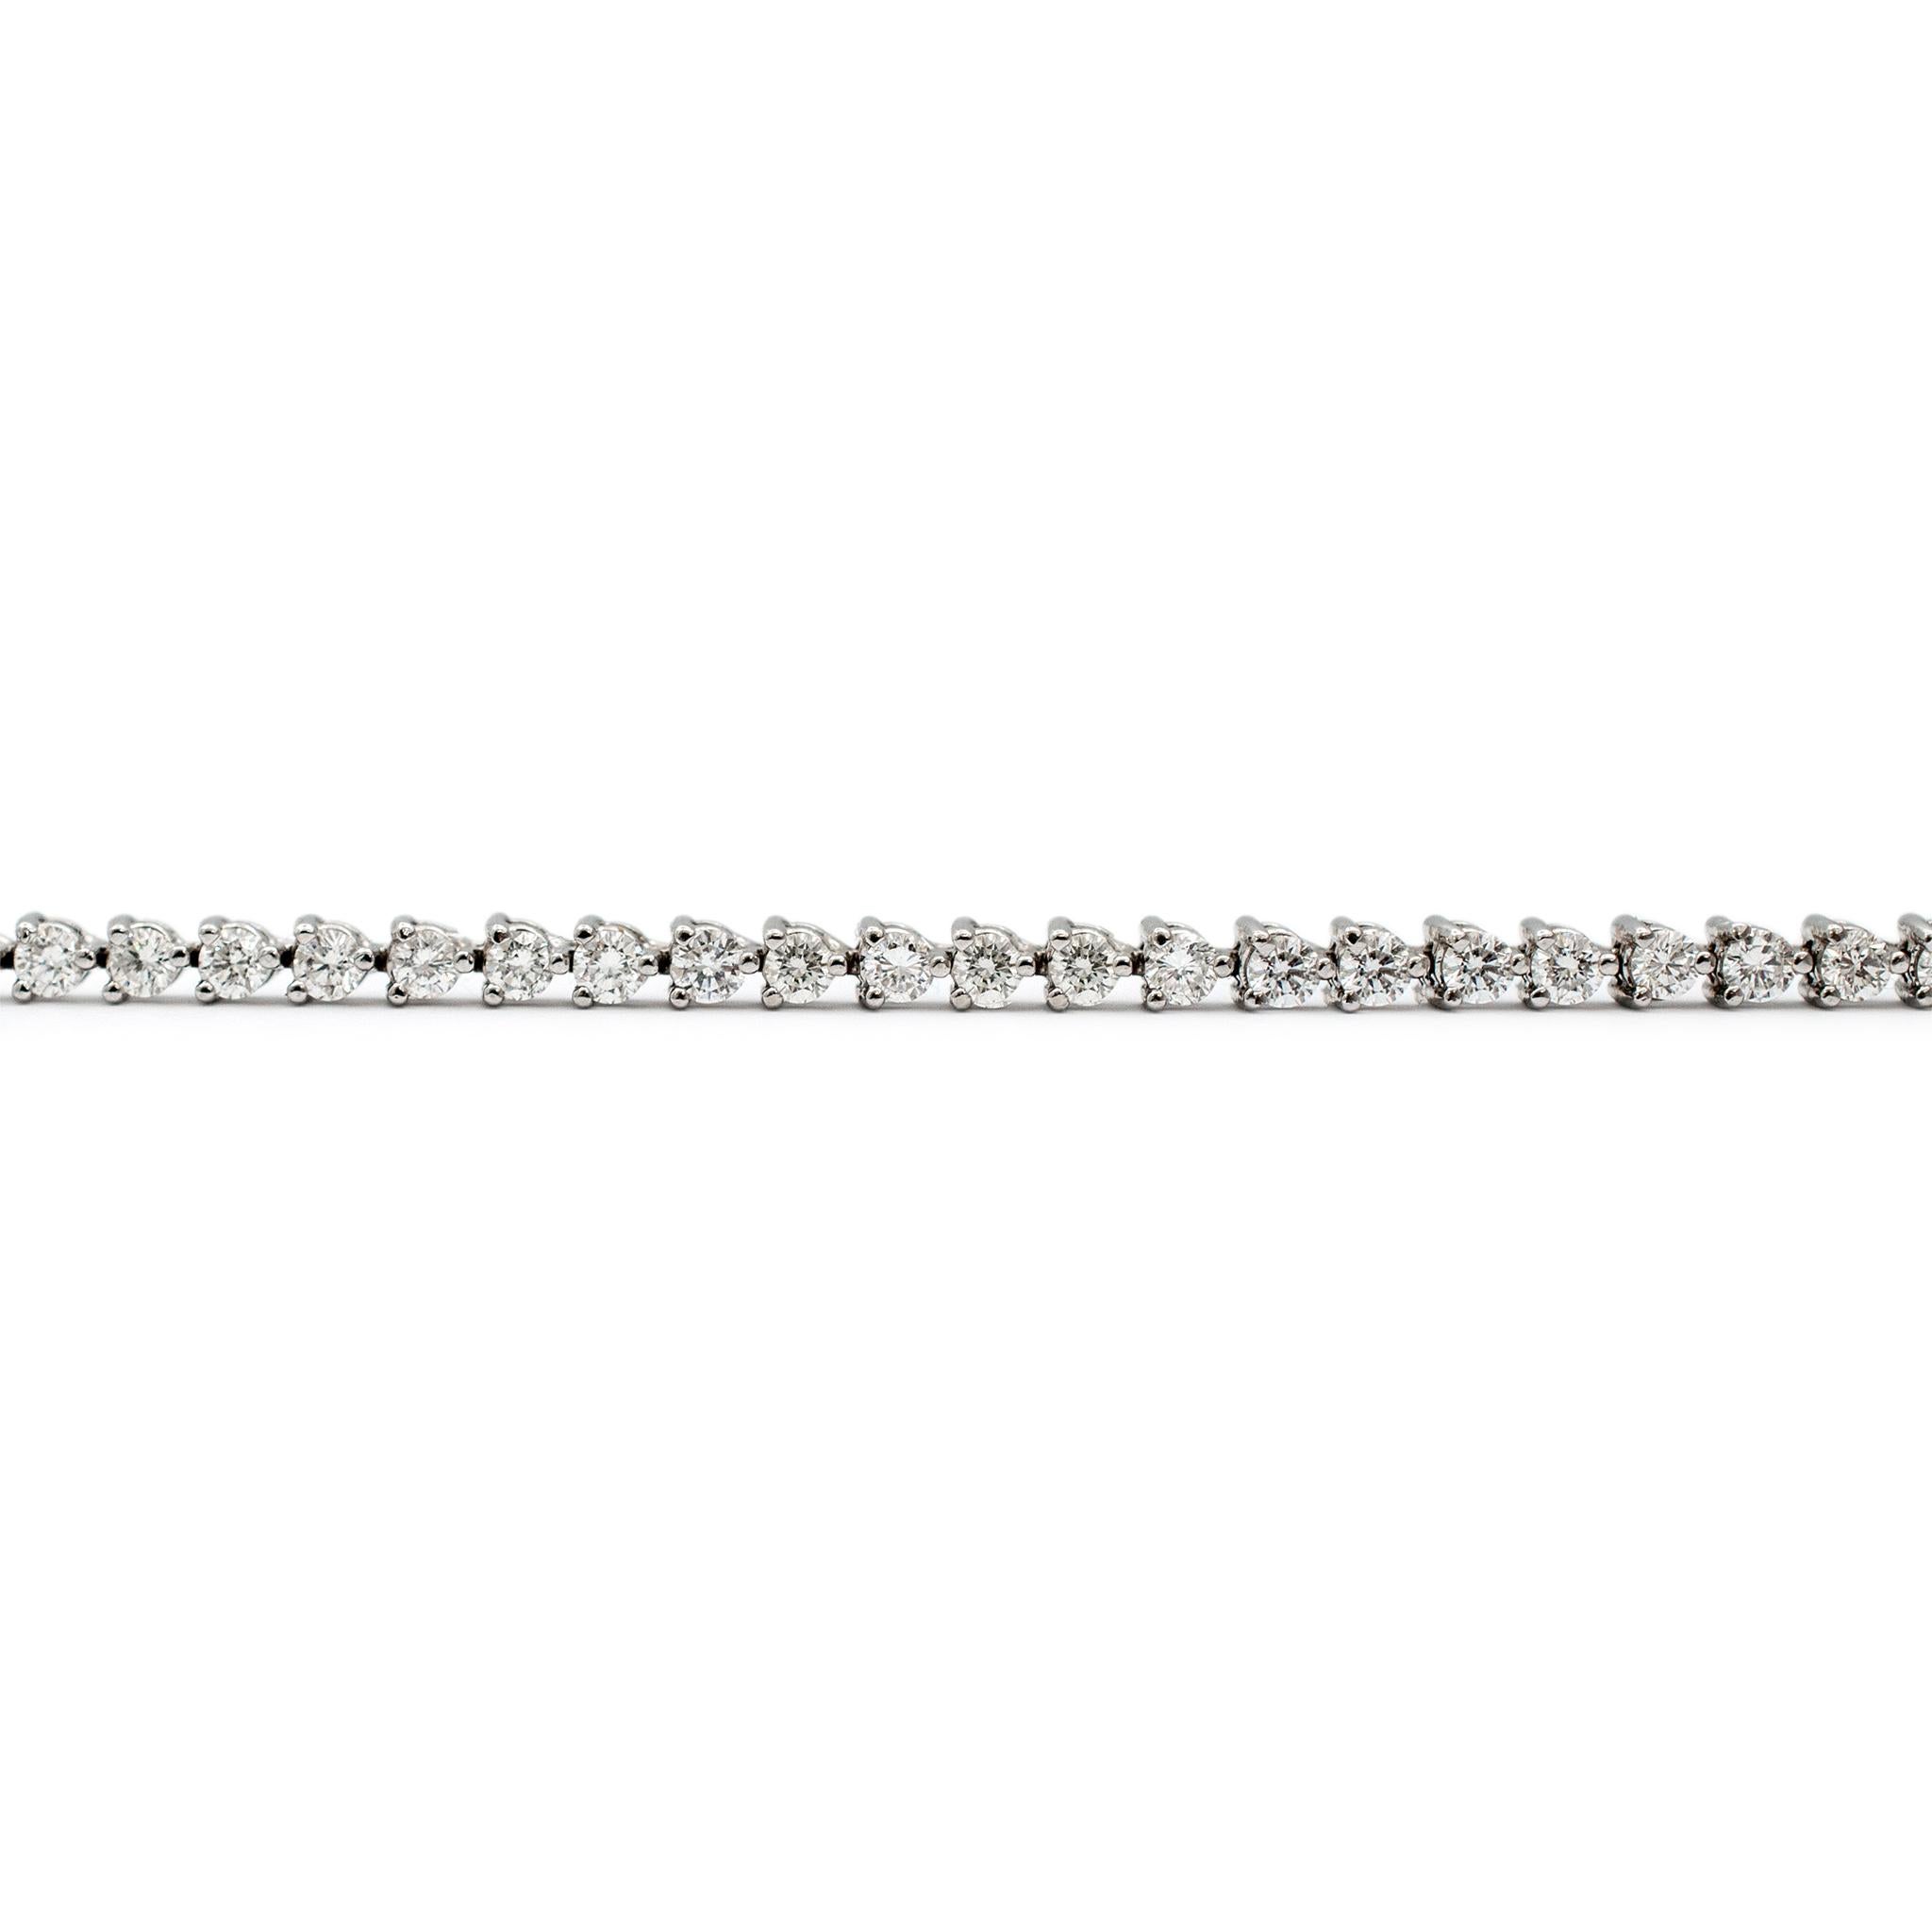 14K White Gold Ladies 3.90 Carats Diamond Tennis Bracelet In Excellent Condition For Sale In Houston, TX